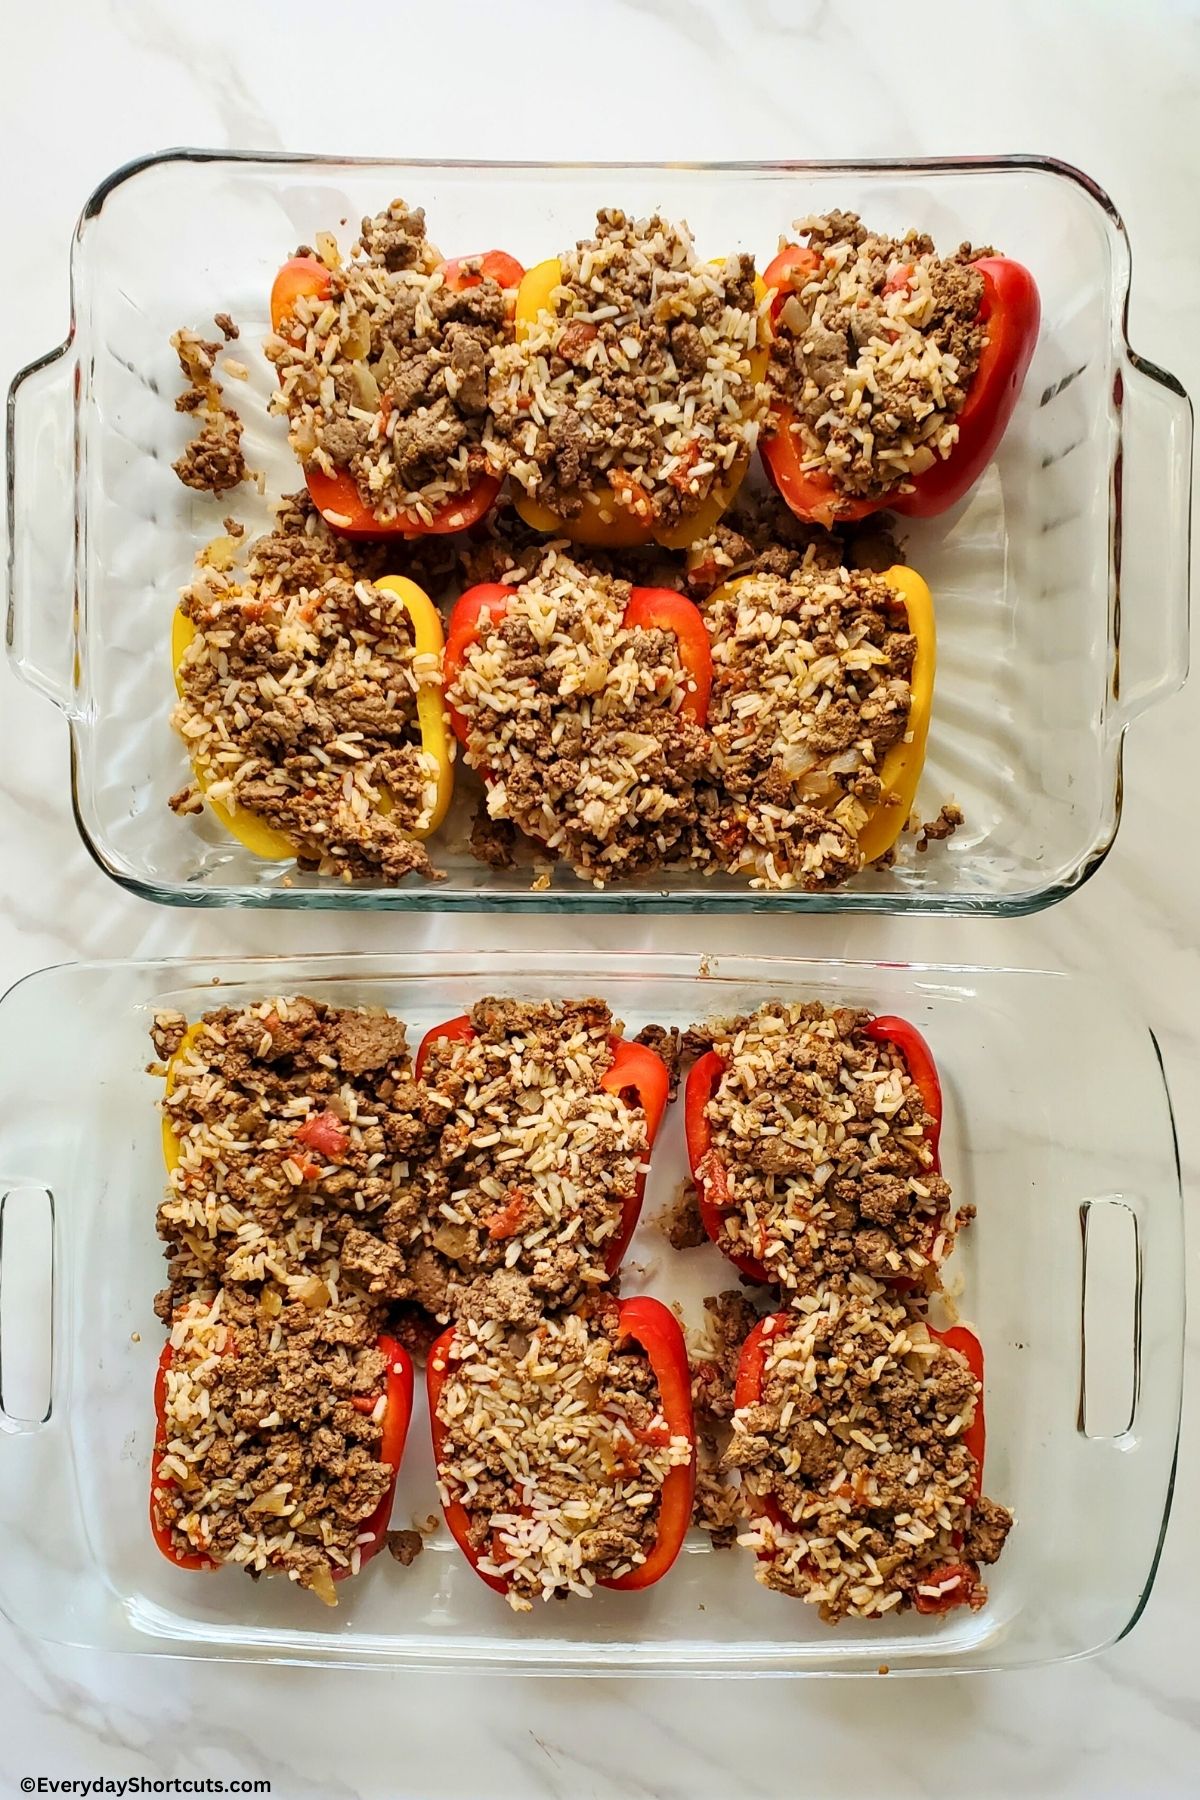 meat mixture with tomatoes and rice stuffed in bell peppers